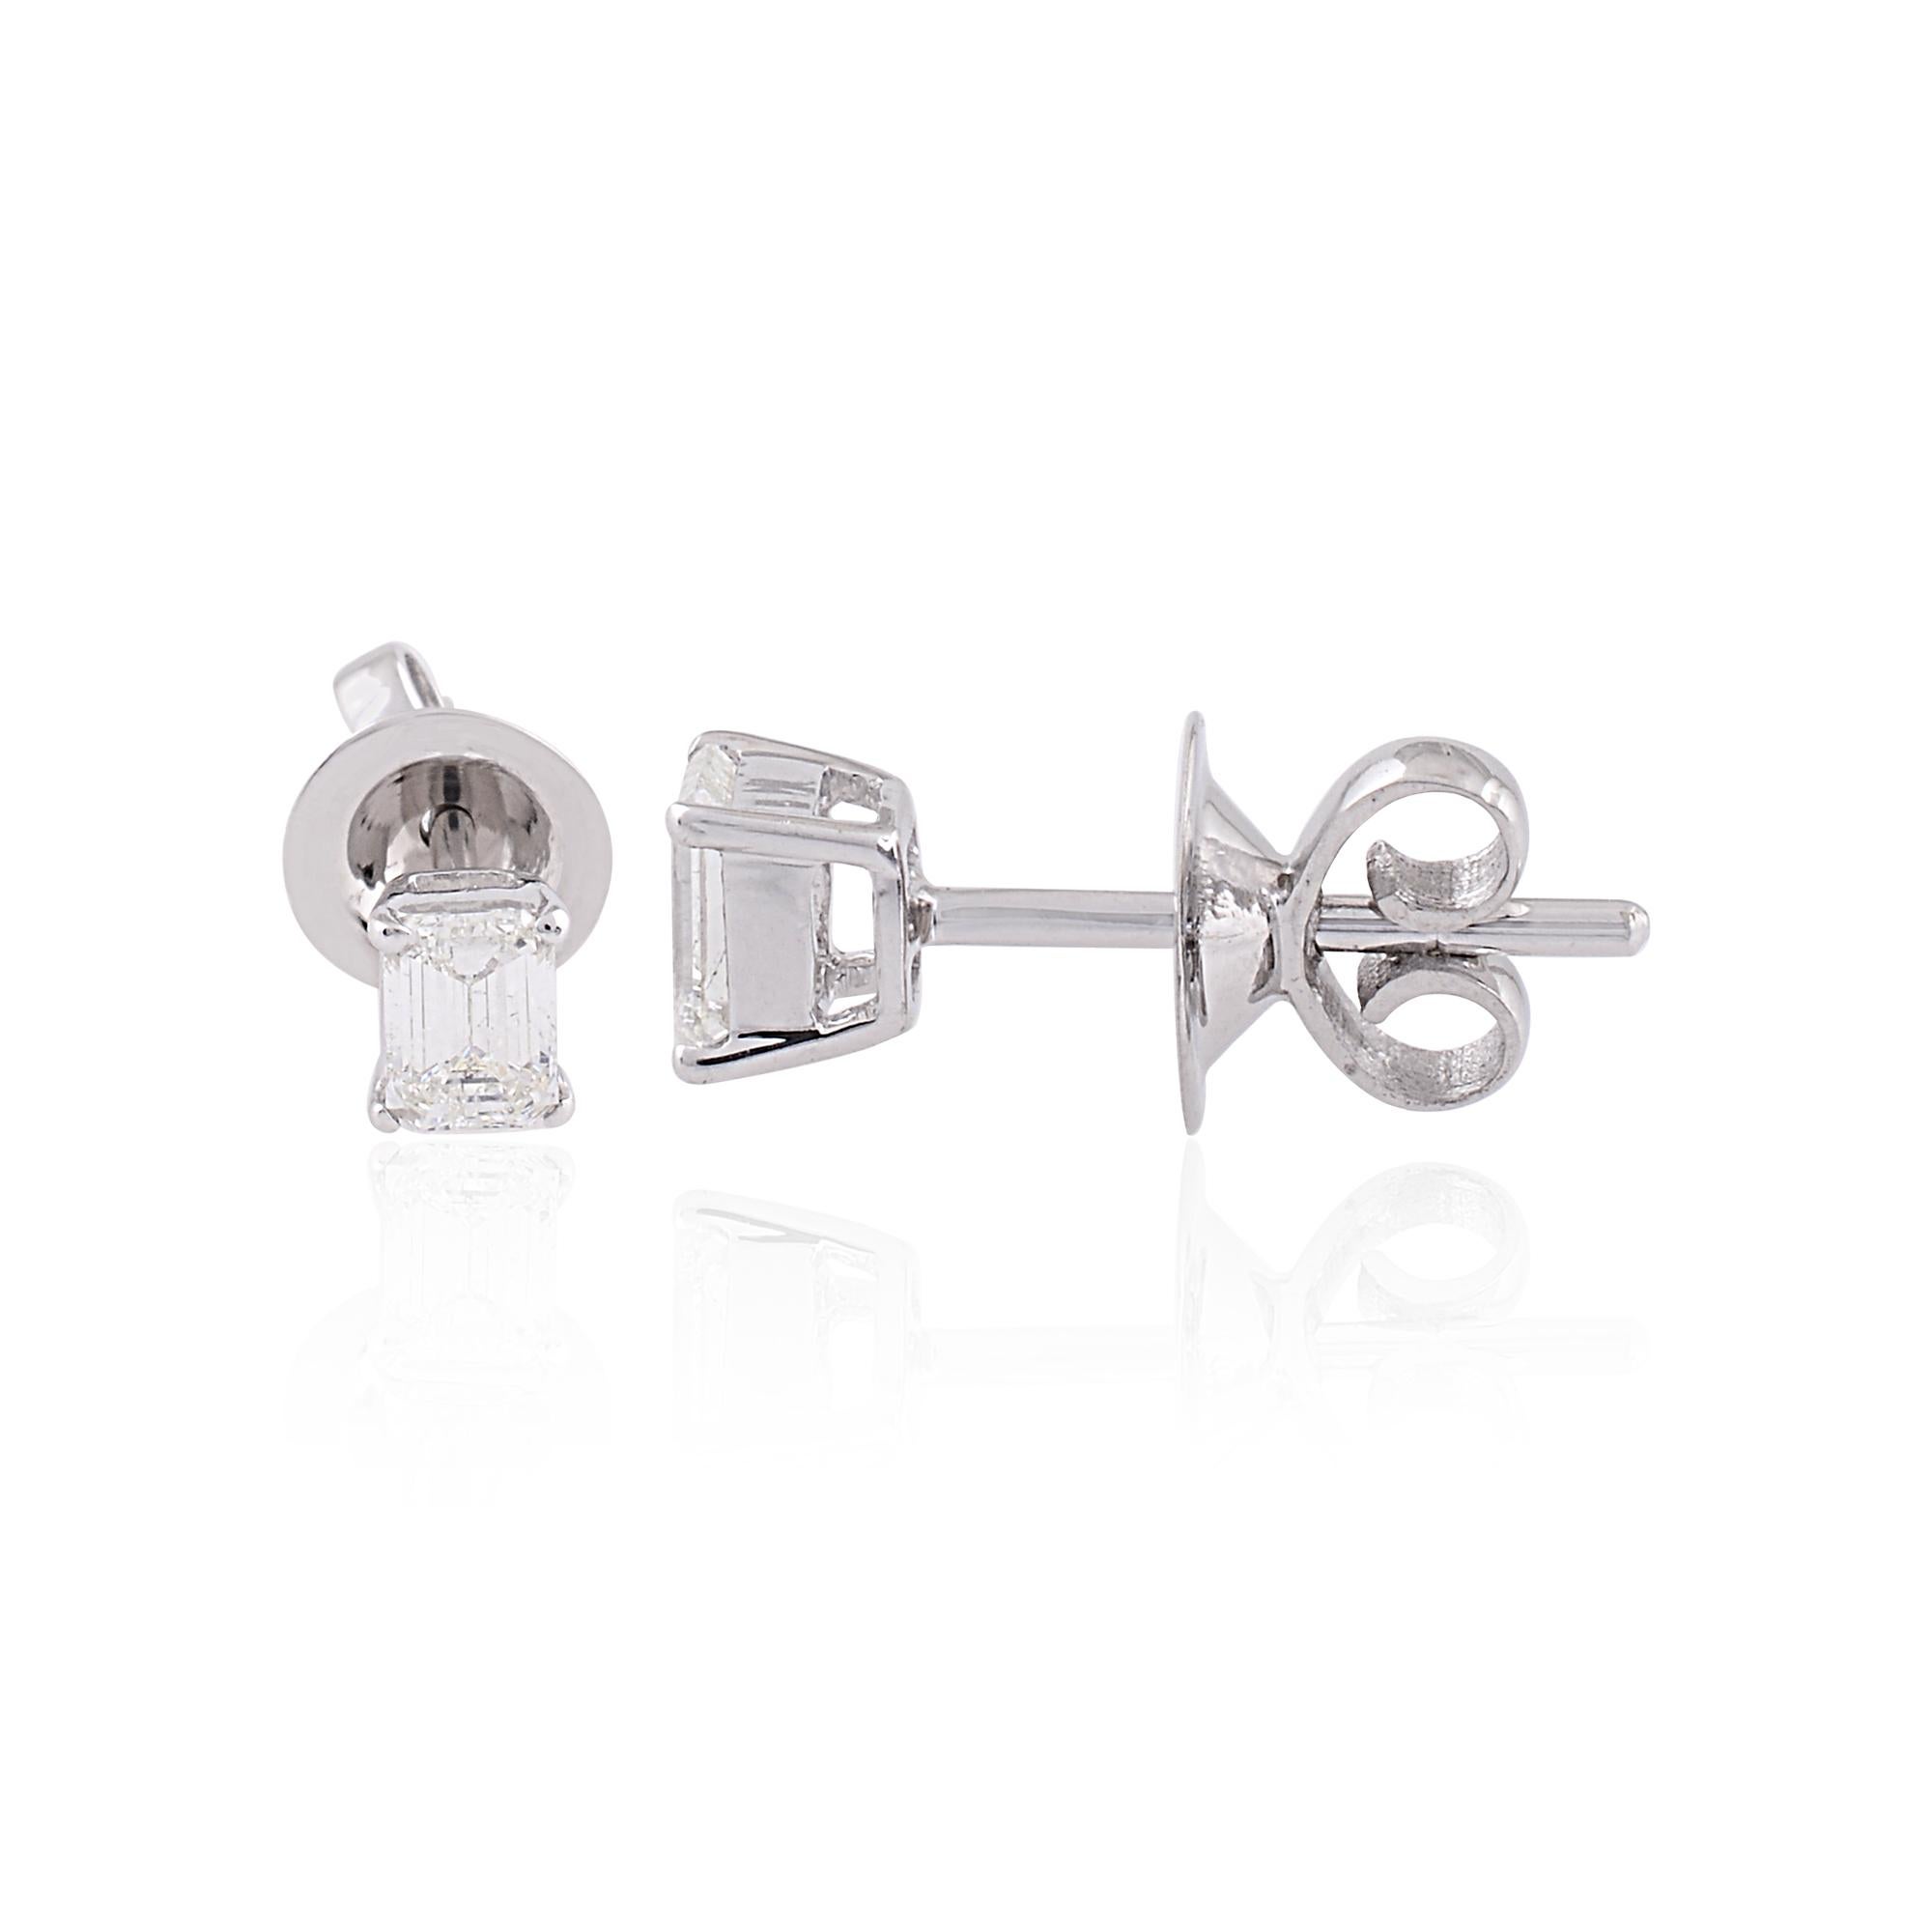 Modern Natural 0.68 Carat Emerald Diamond Stud Earrings Solid 18k White Gold Jewelry For Sale